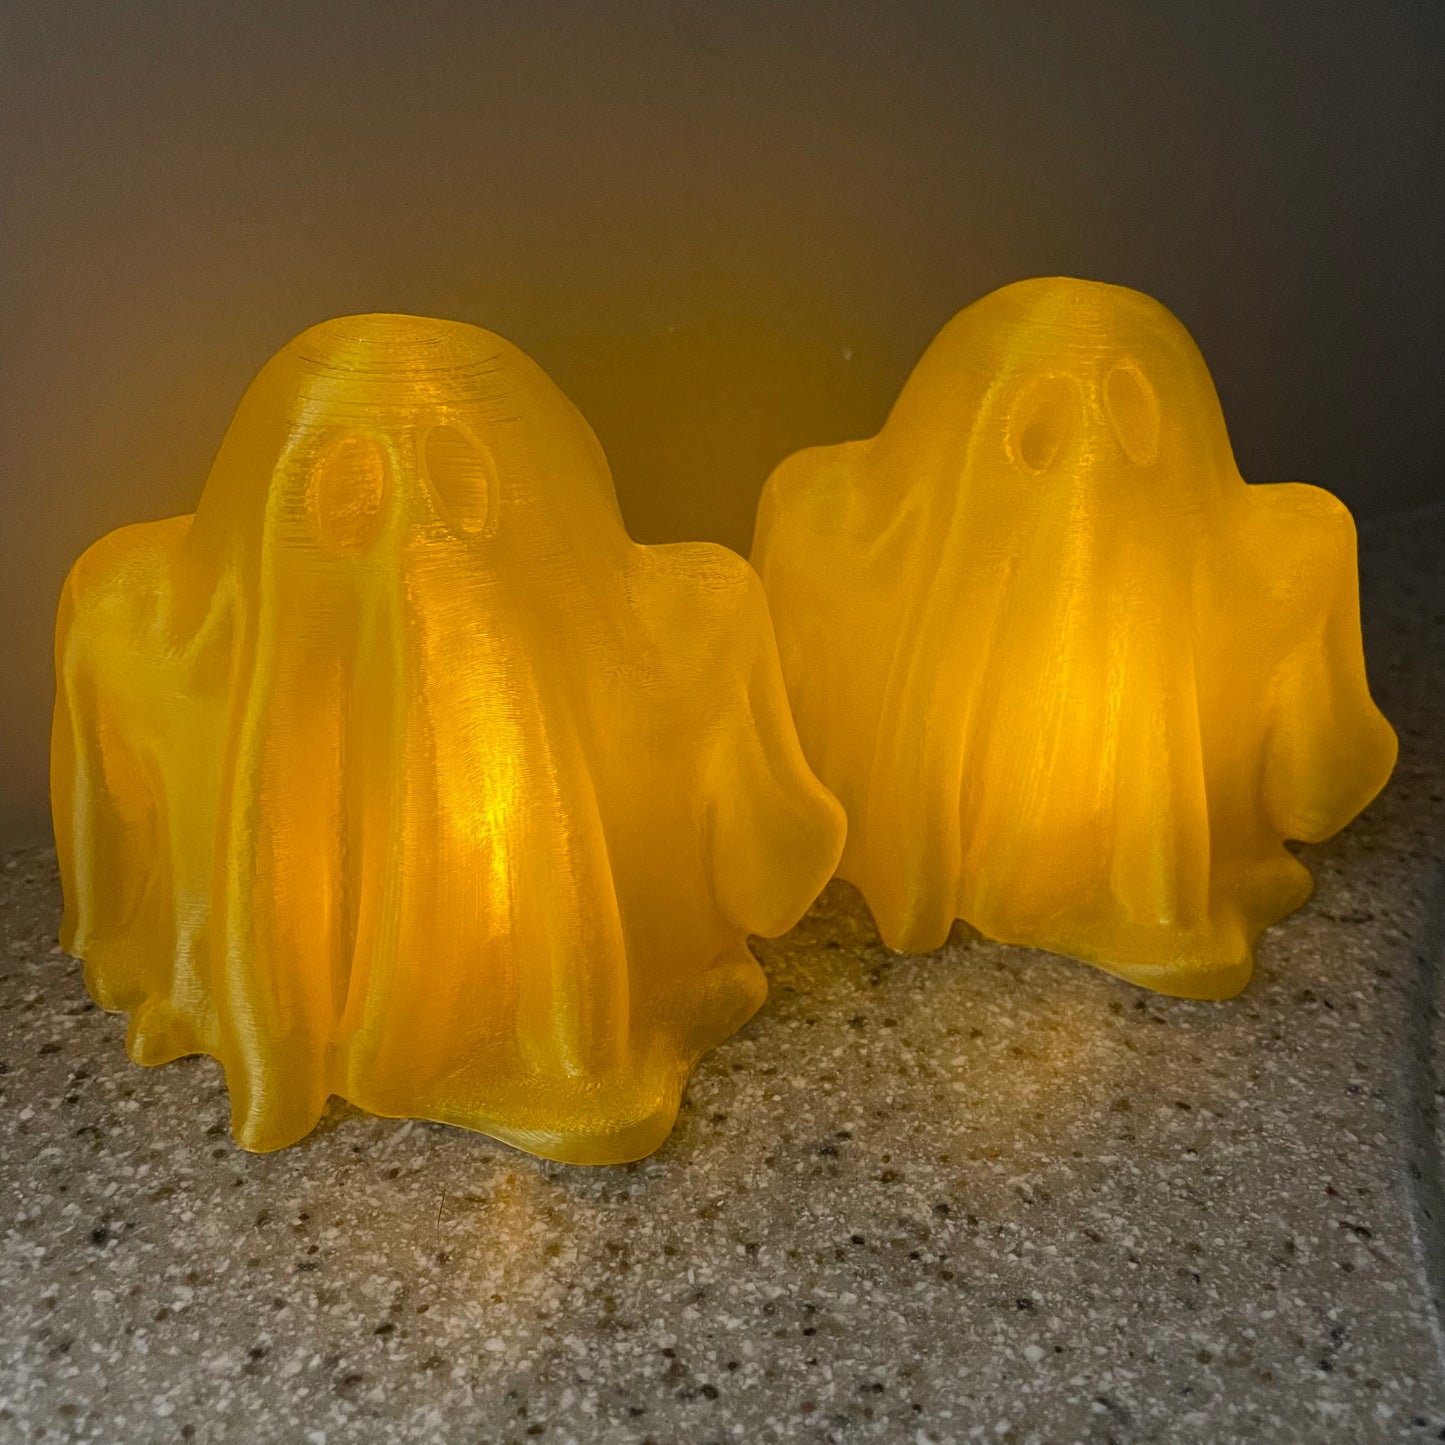 3D Printed Glass-Like Light Up Ghost